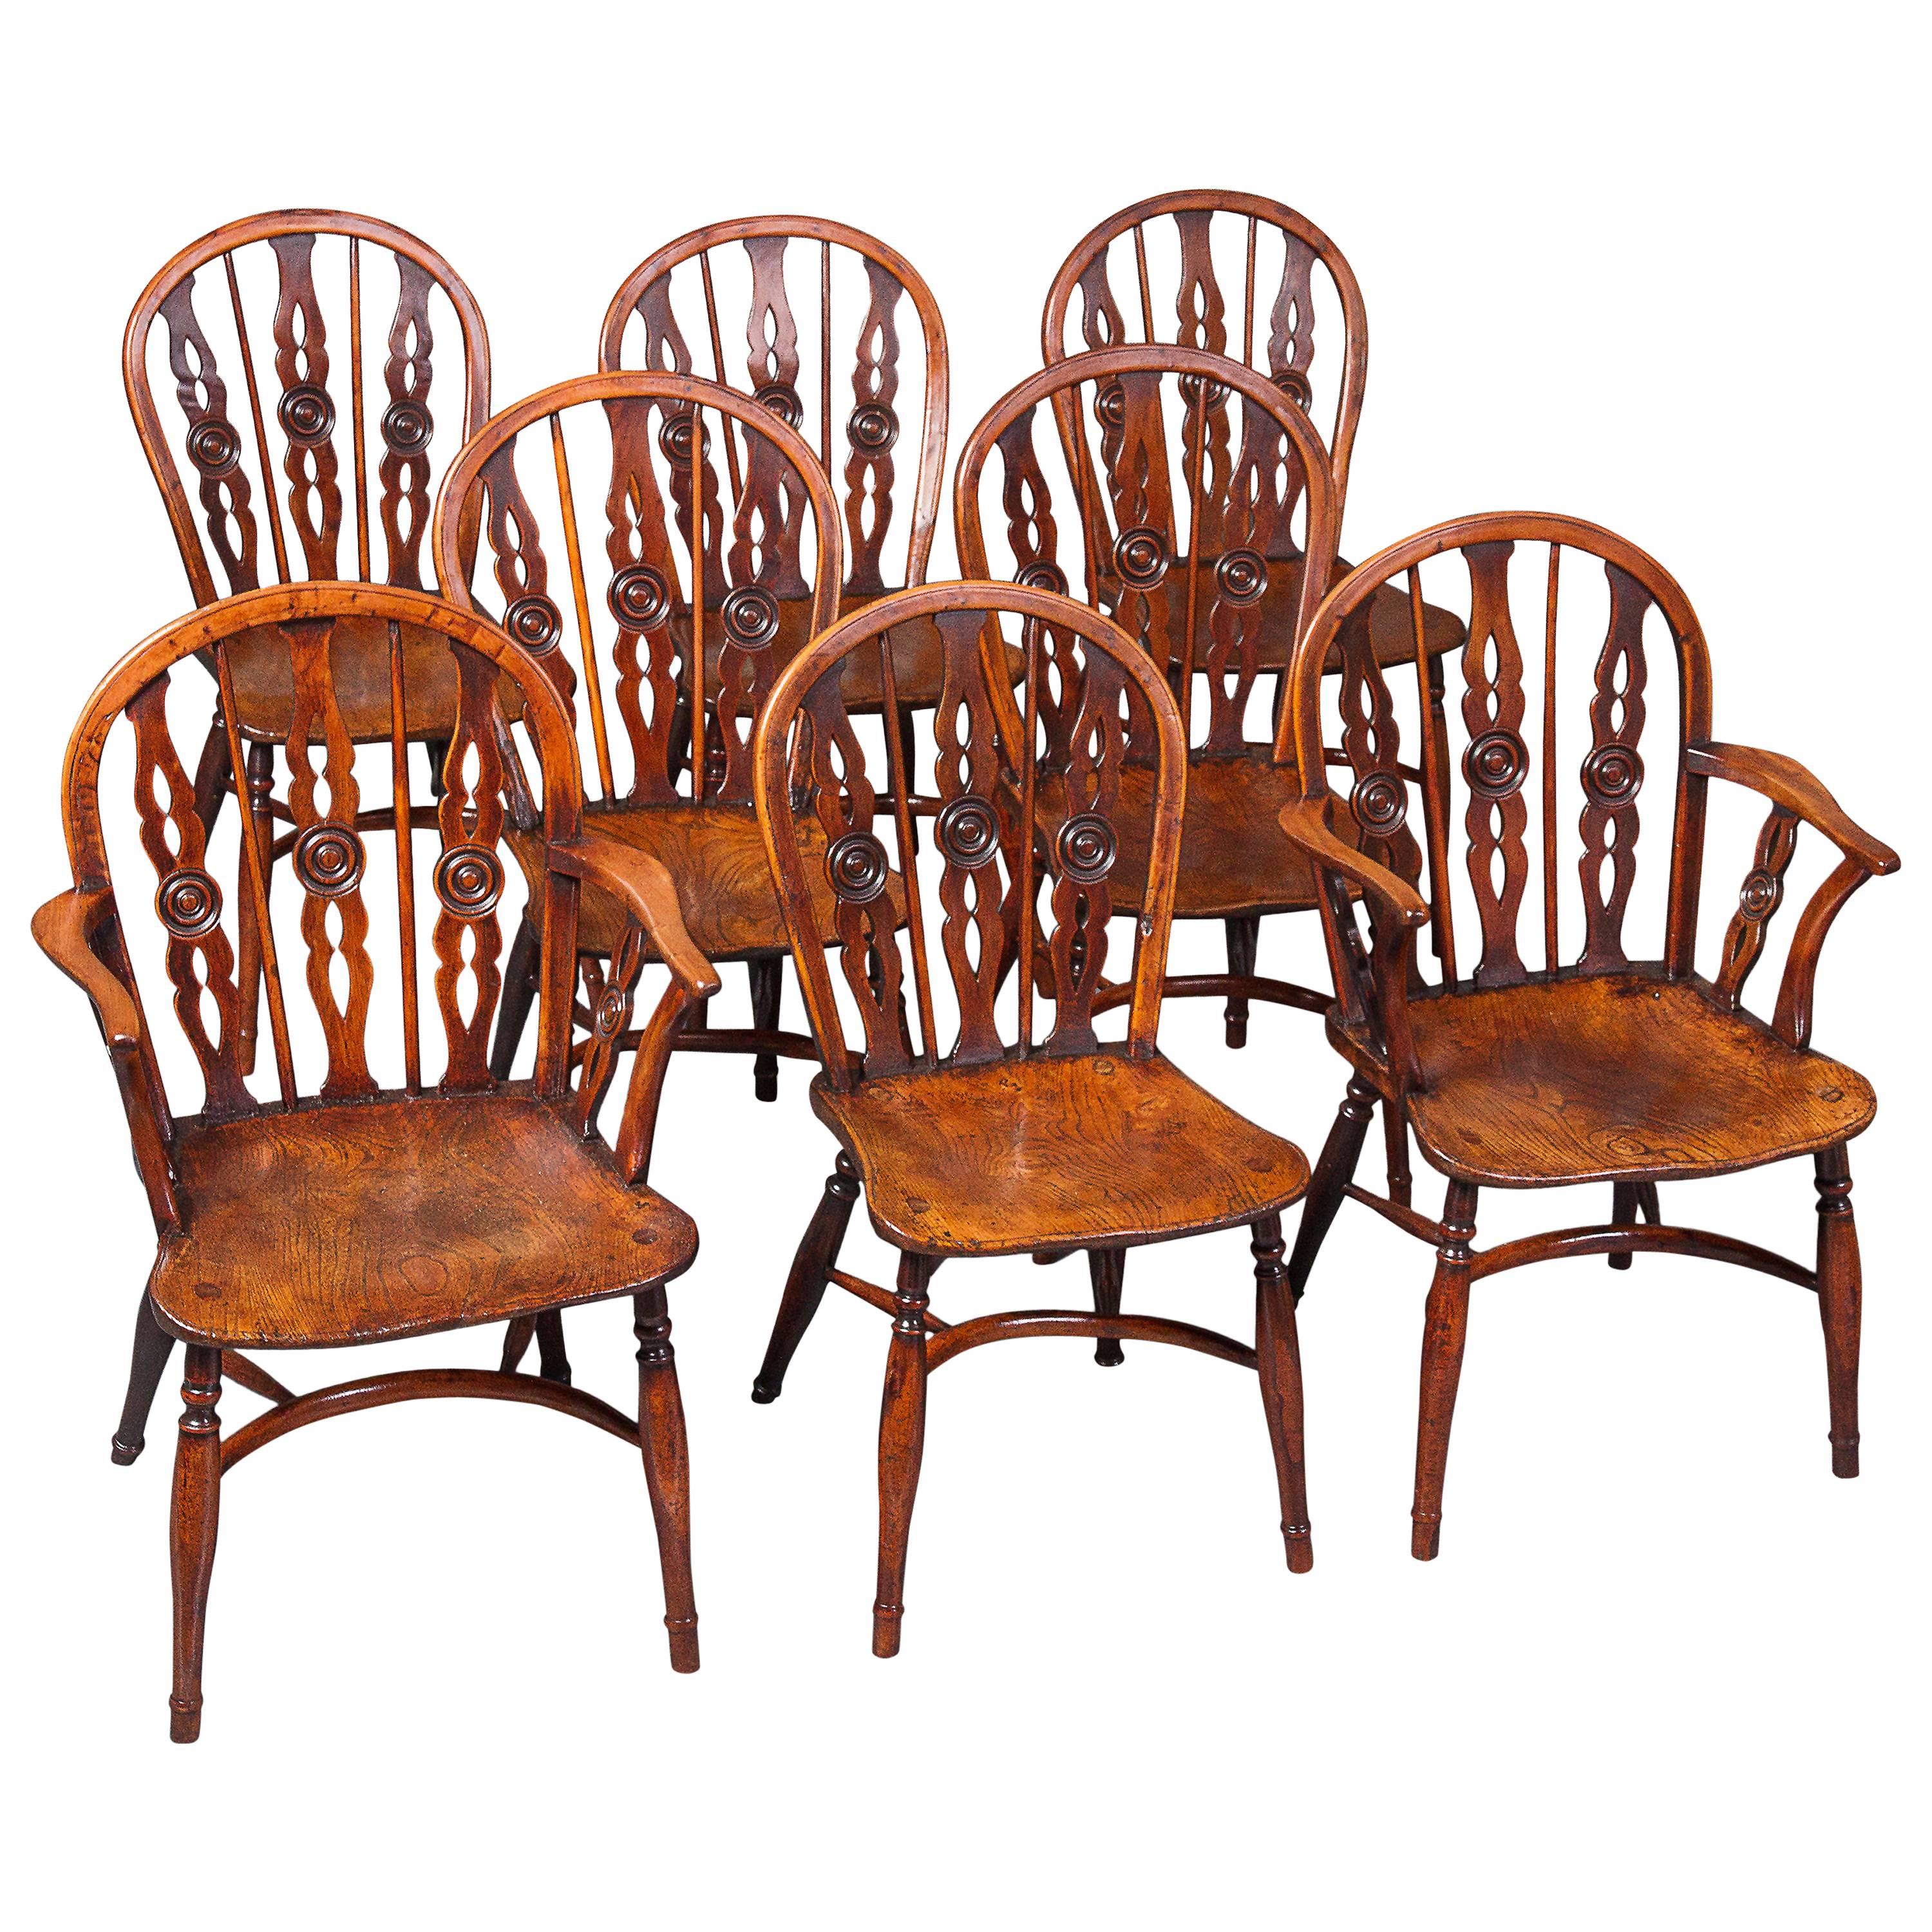 Very Fine and Rare Set of Eight Yew and Elm Windsor Chairs